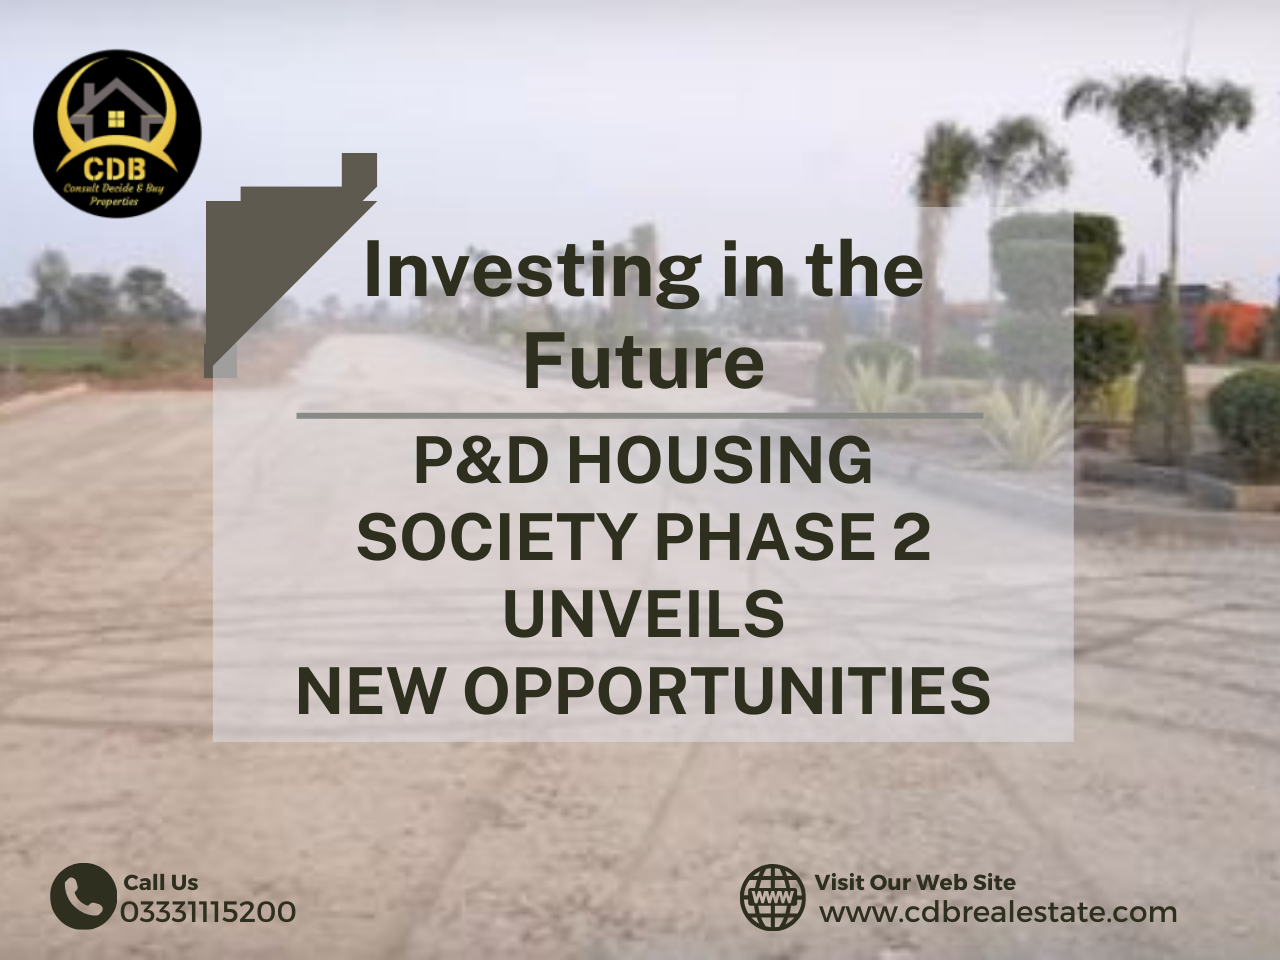 Investing in the Future: P&D Housing Society Phase 2 Unveils New Opportunities